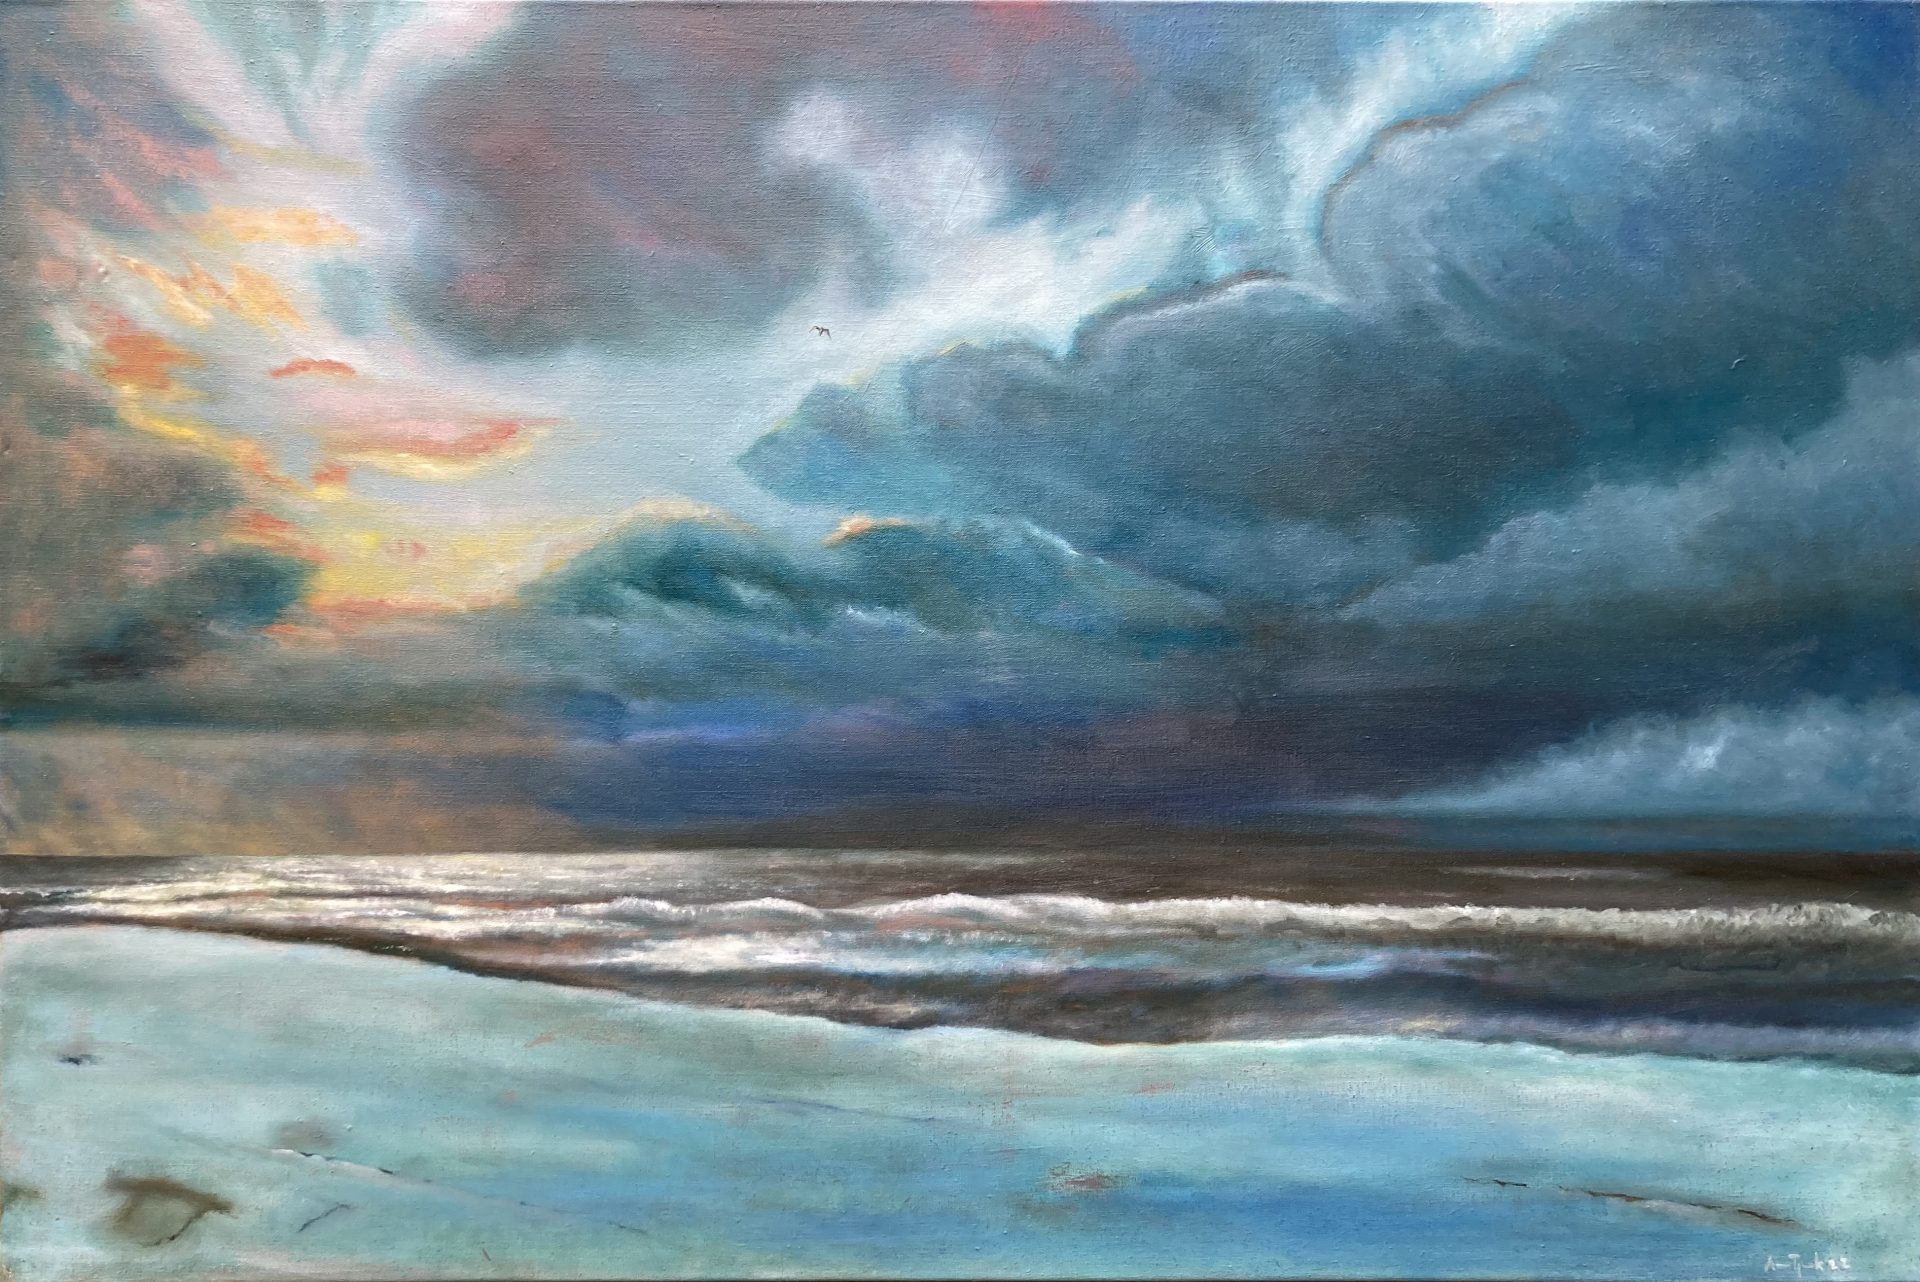 Winter seascape, North from the isle of Vlieland, oil on canvas, 100x150cm, 2022. €2750,-